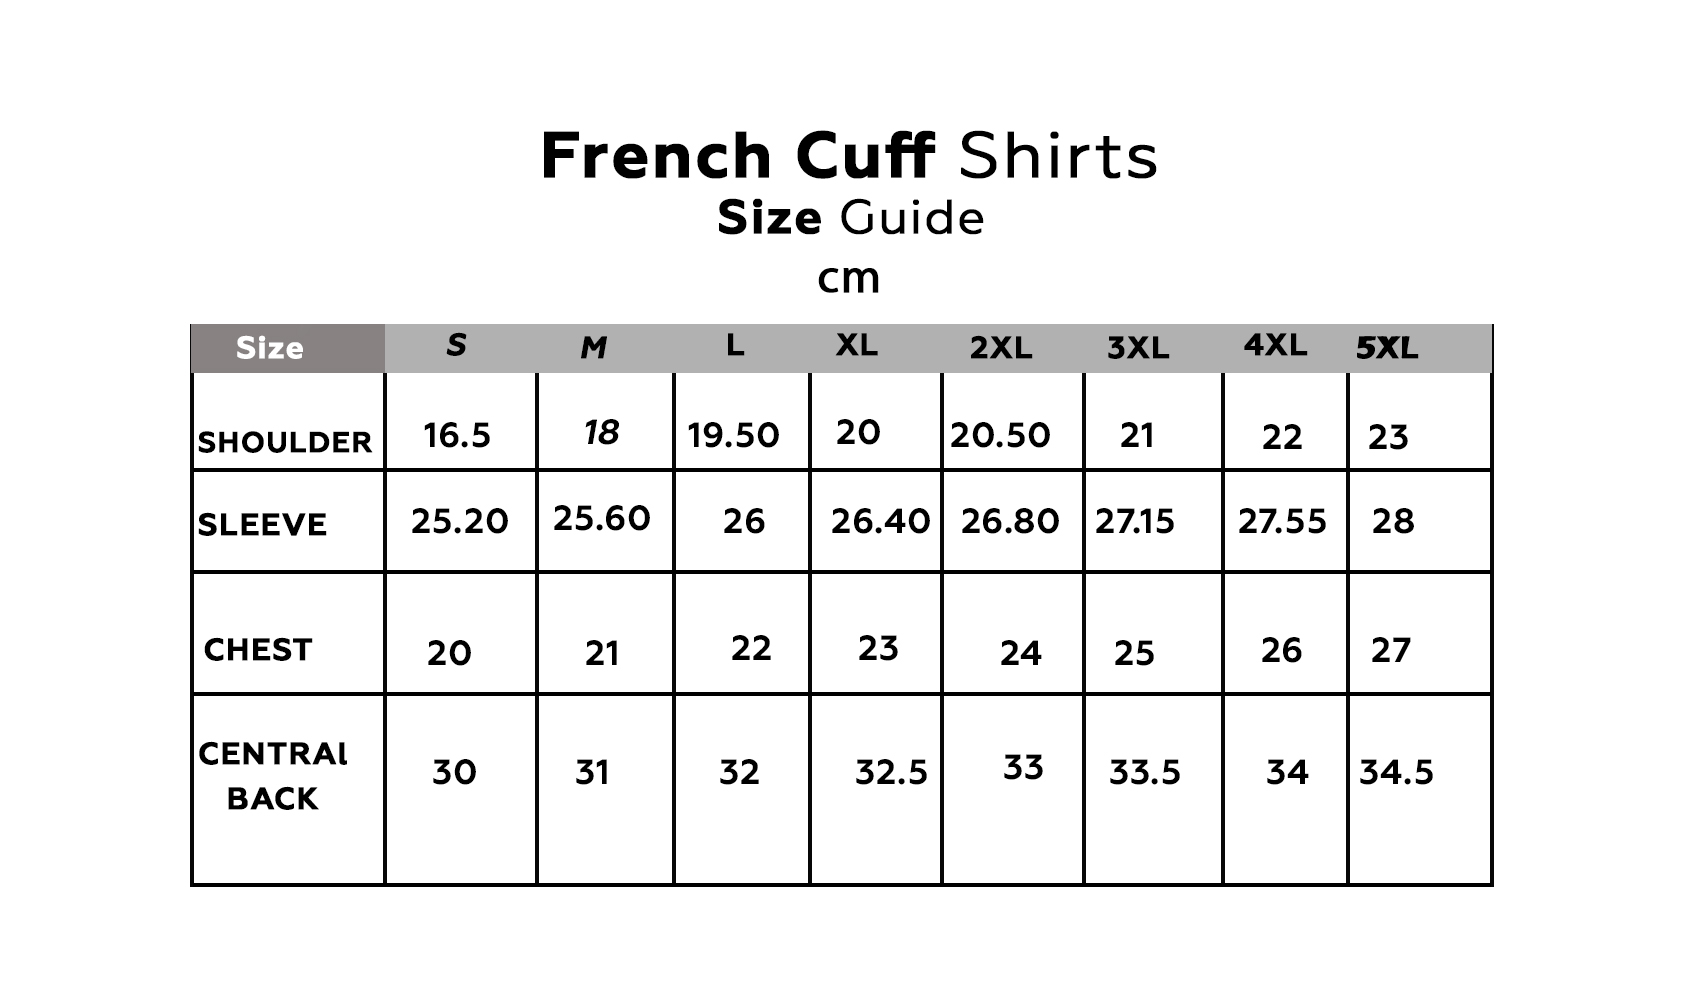 Cream Design Mens Slim Fit French Cuff Shirts with Cufflink Holes - Casual and Formal